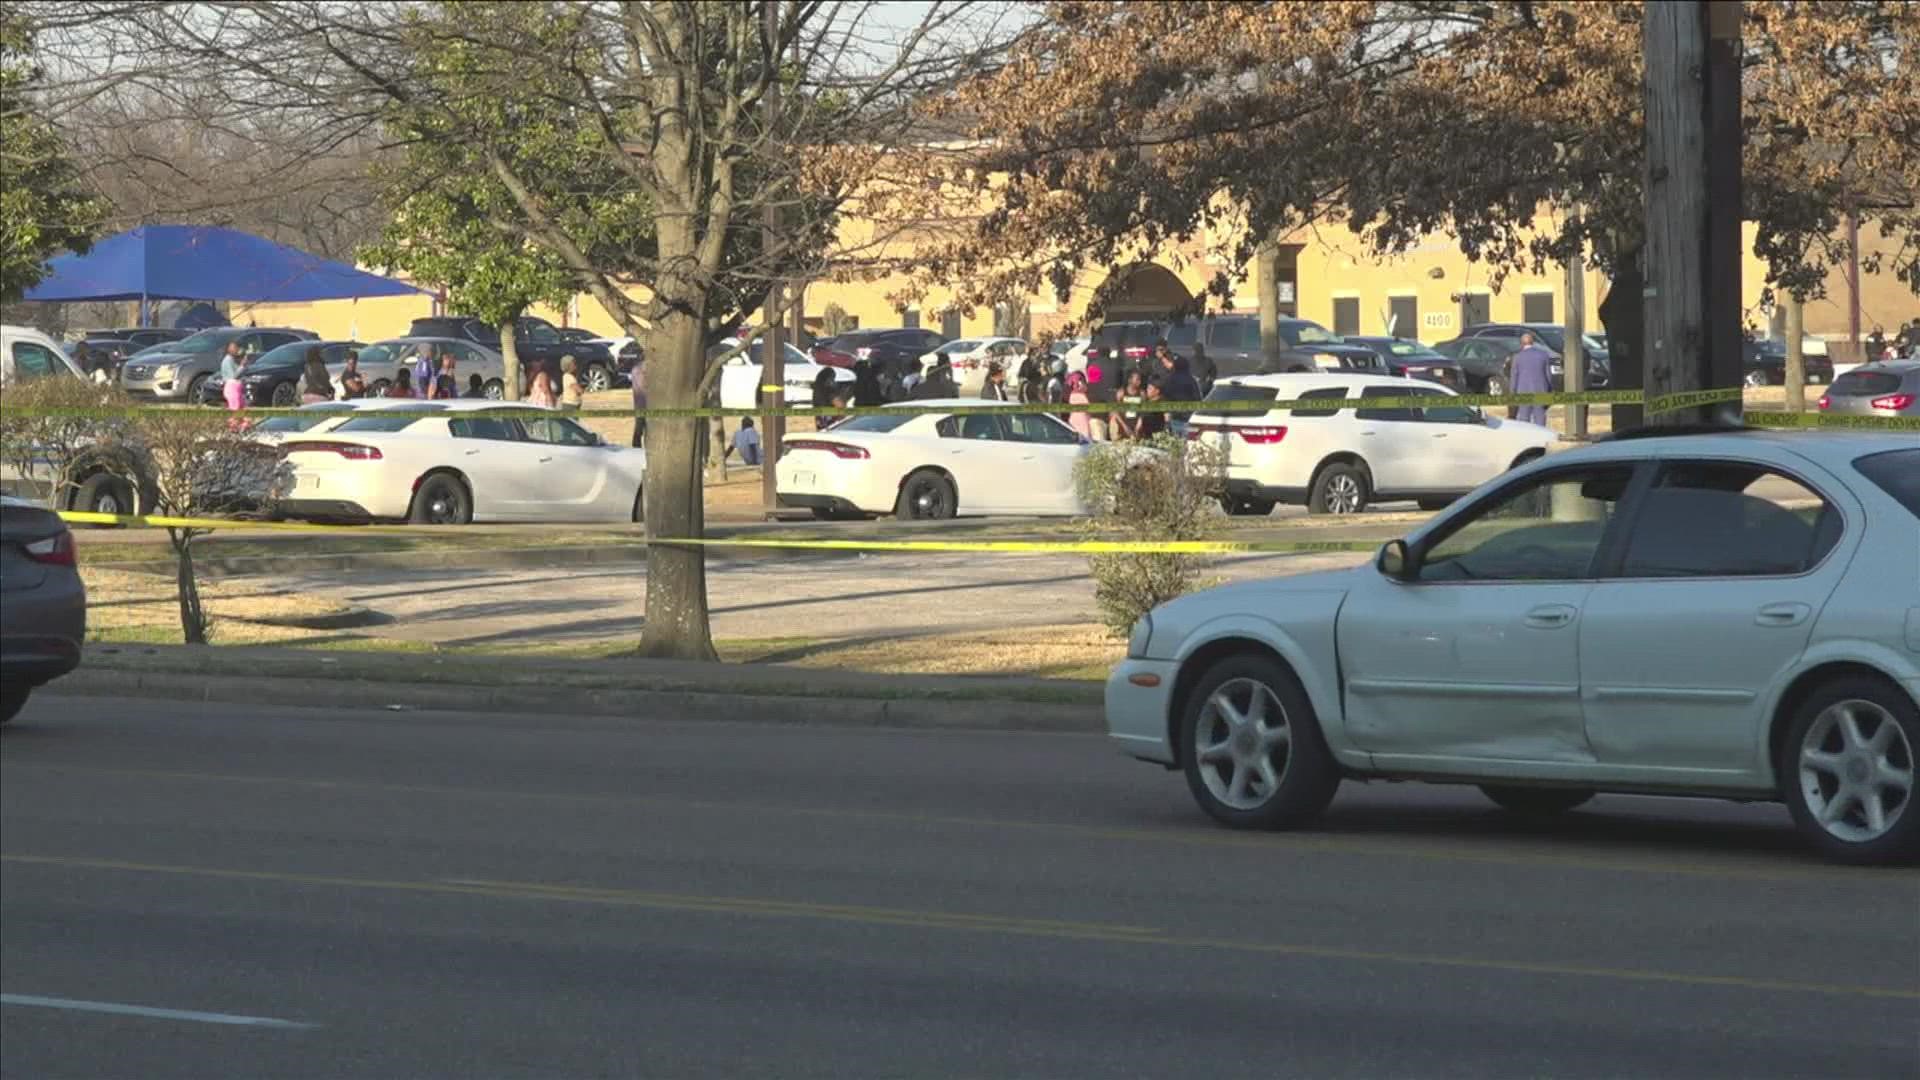 Mom who rushed to get kids from brief elementary school lockdown after nearby shooting speaks